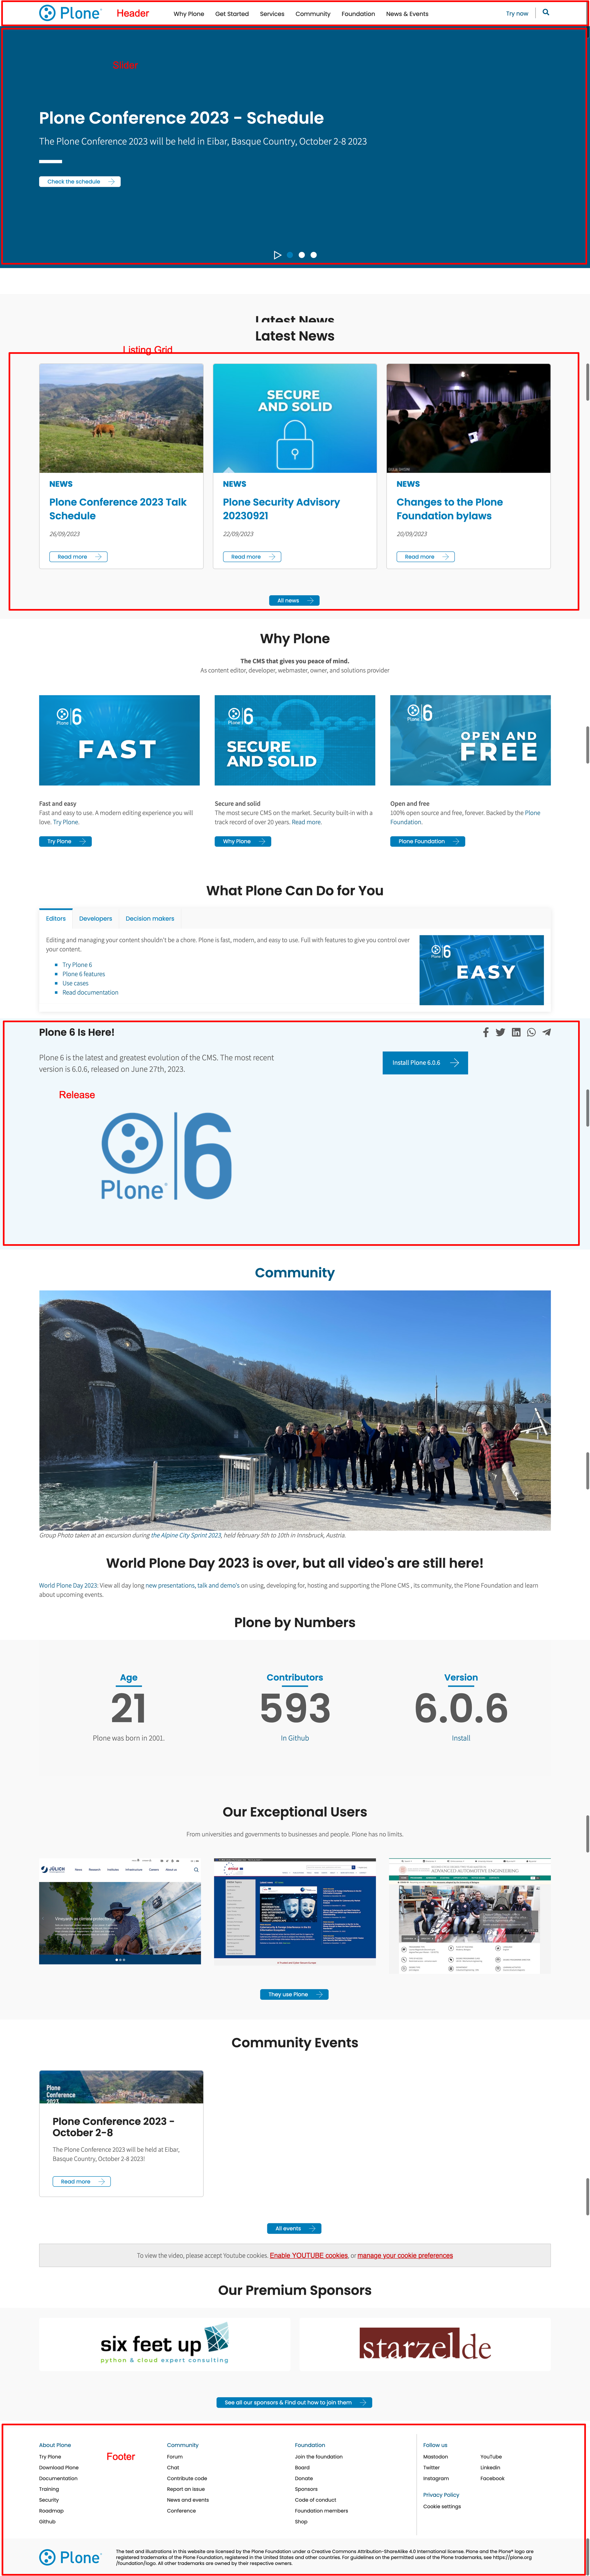 plone.org frontpage